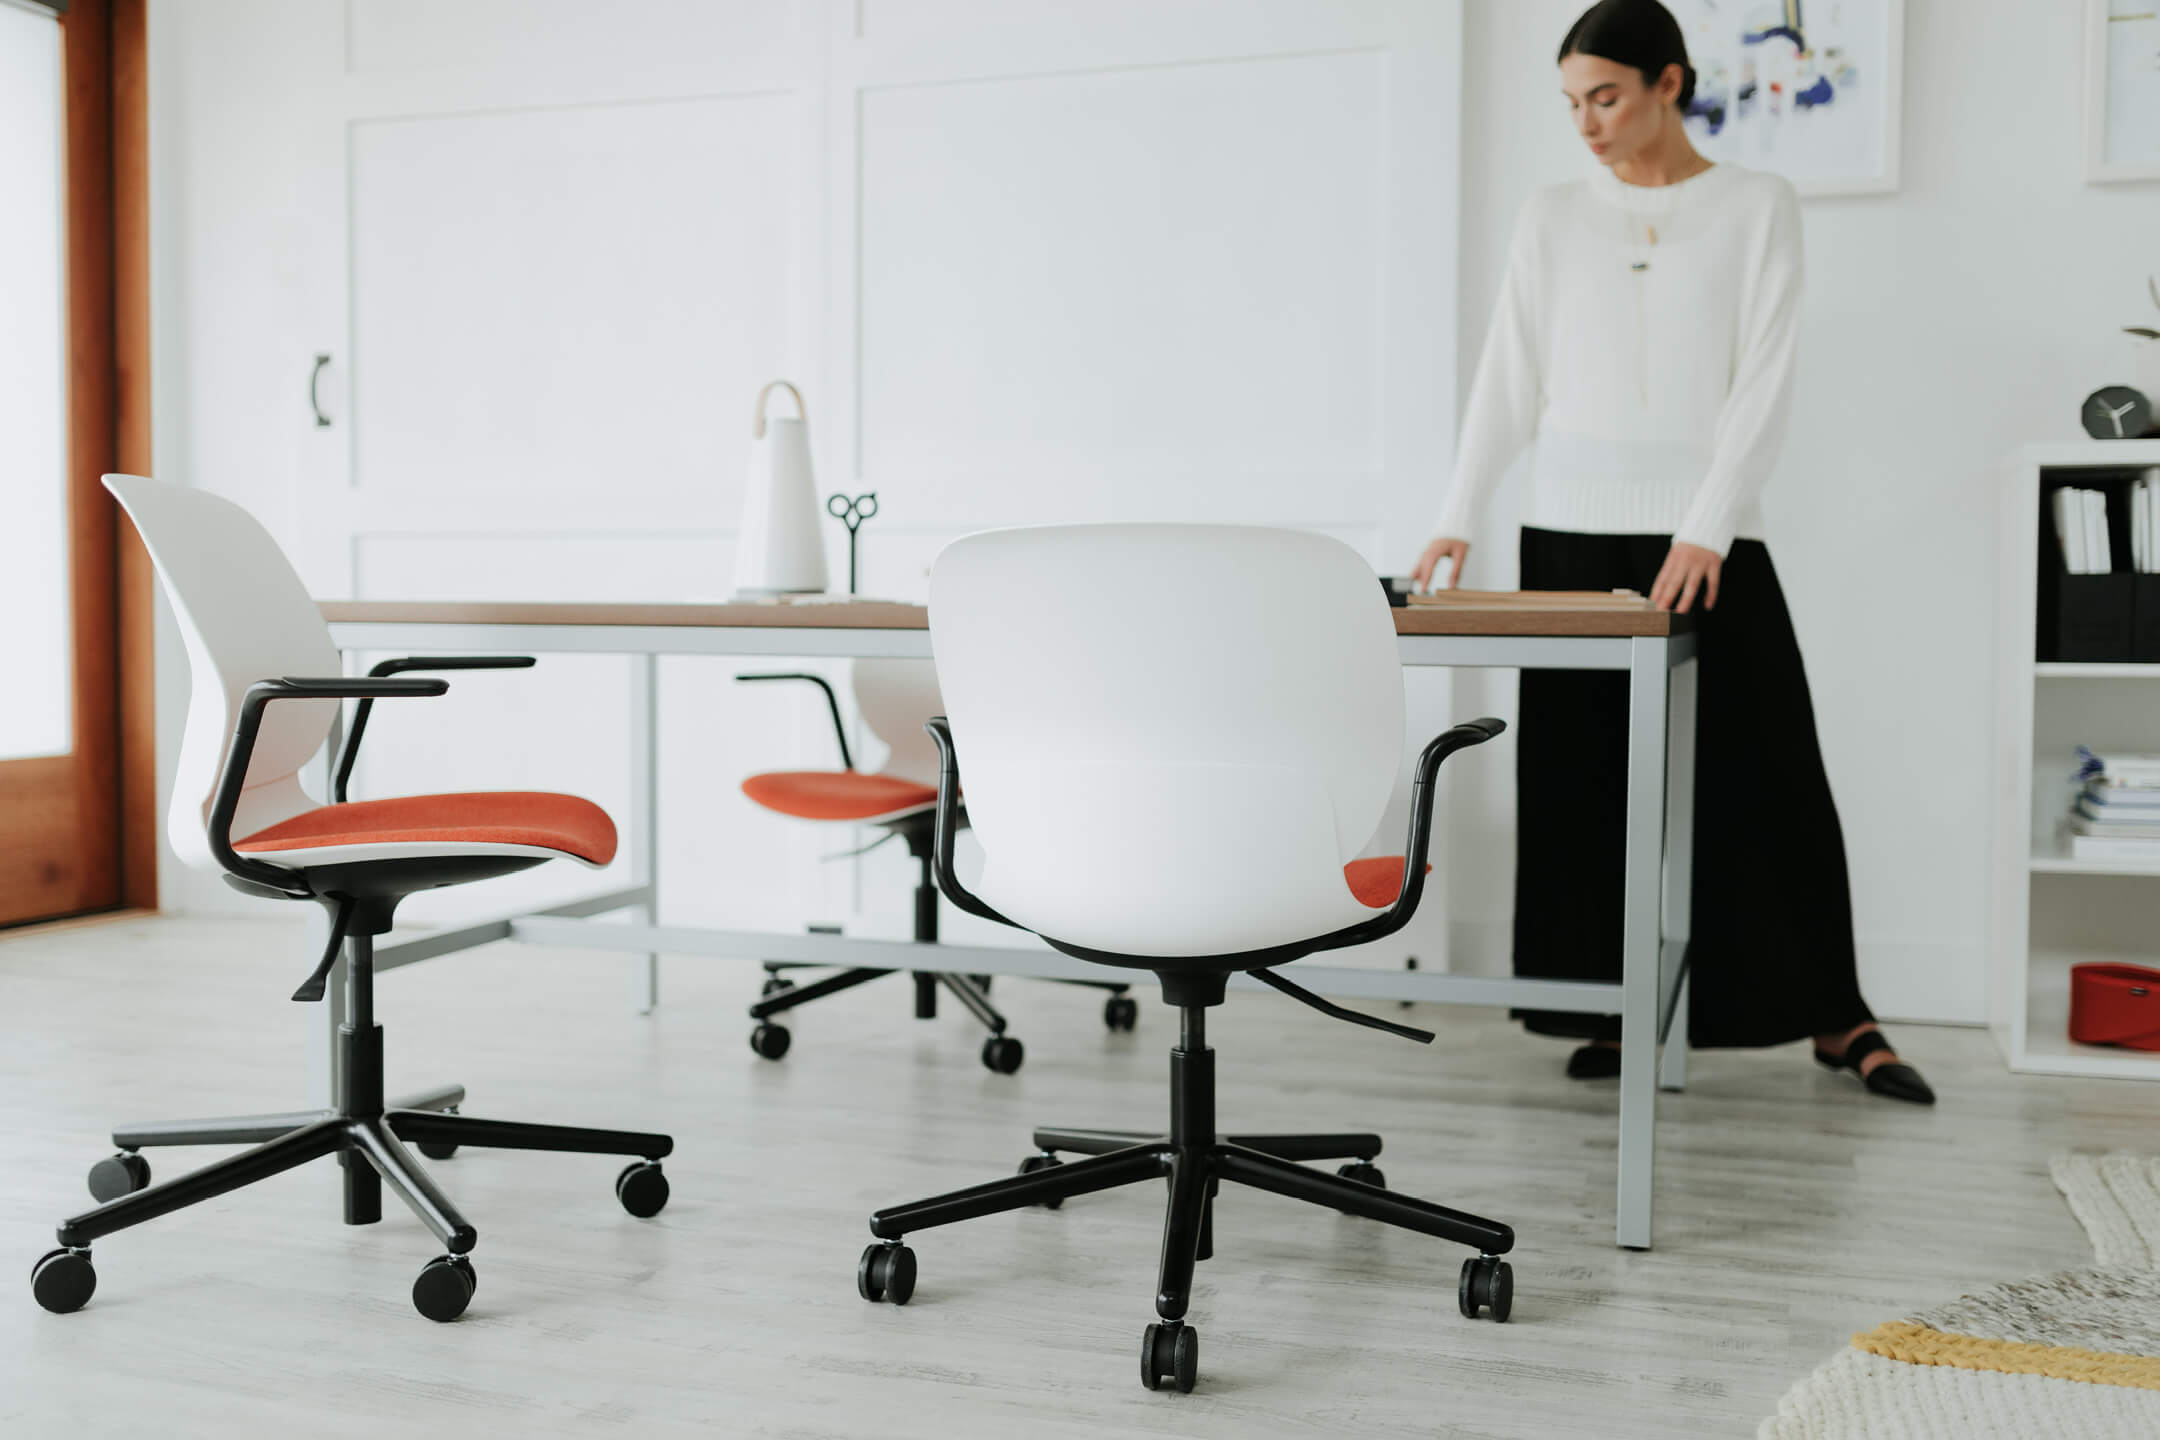 Haworth Patricia Urquiola Designs in office conference room with table and chairs